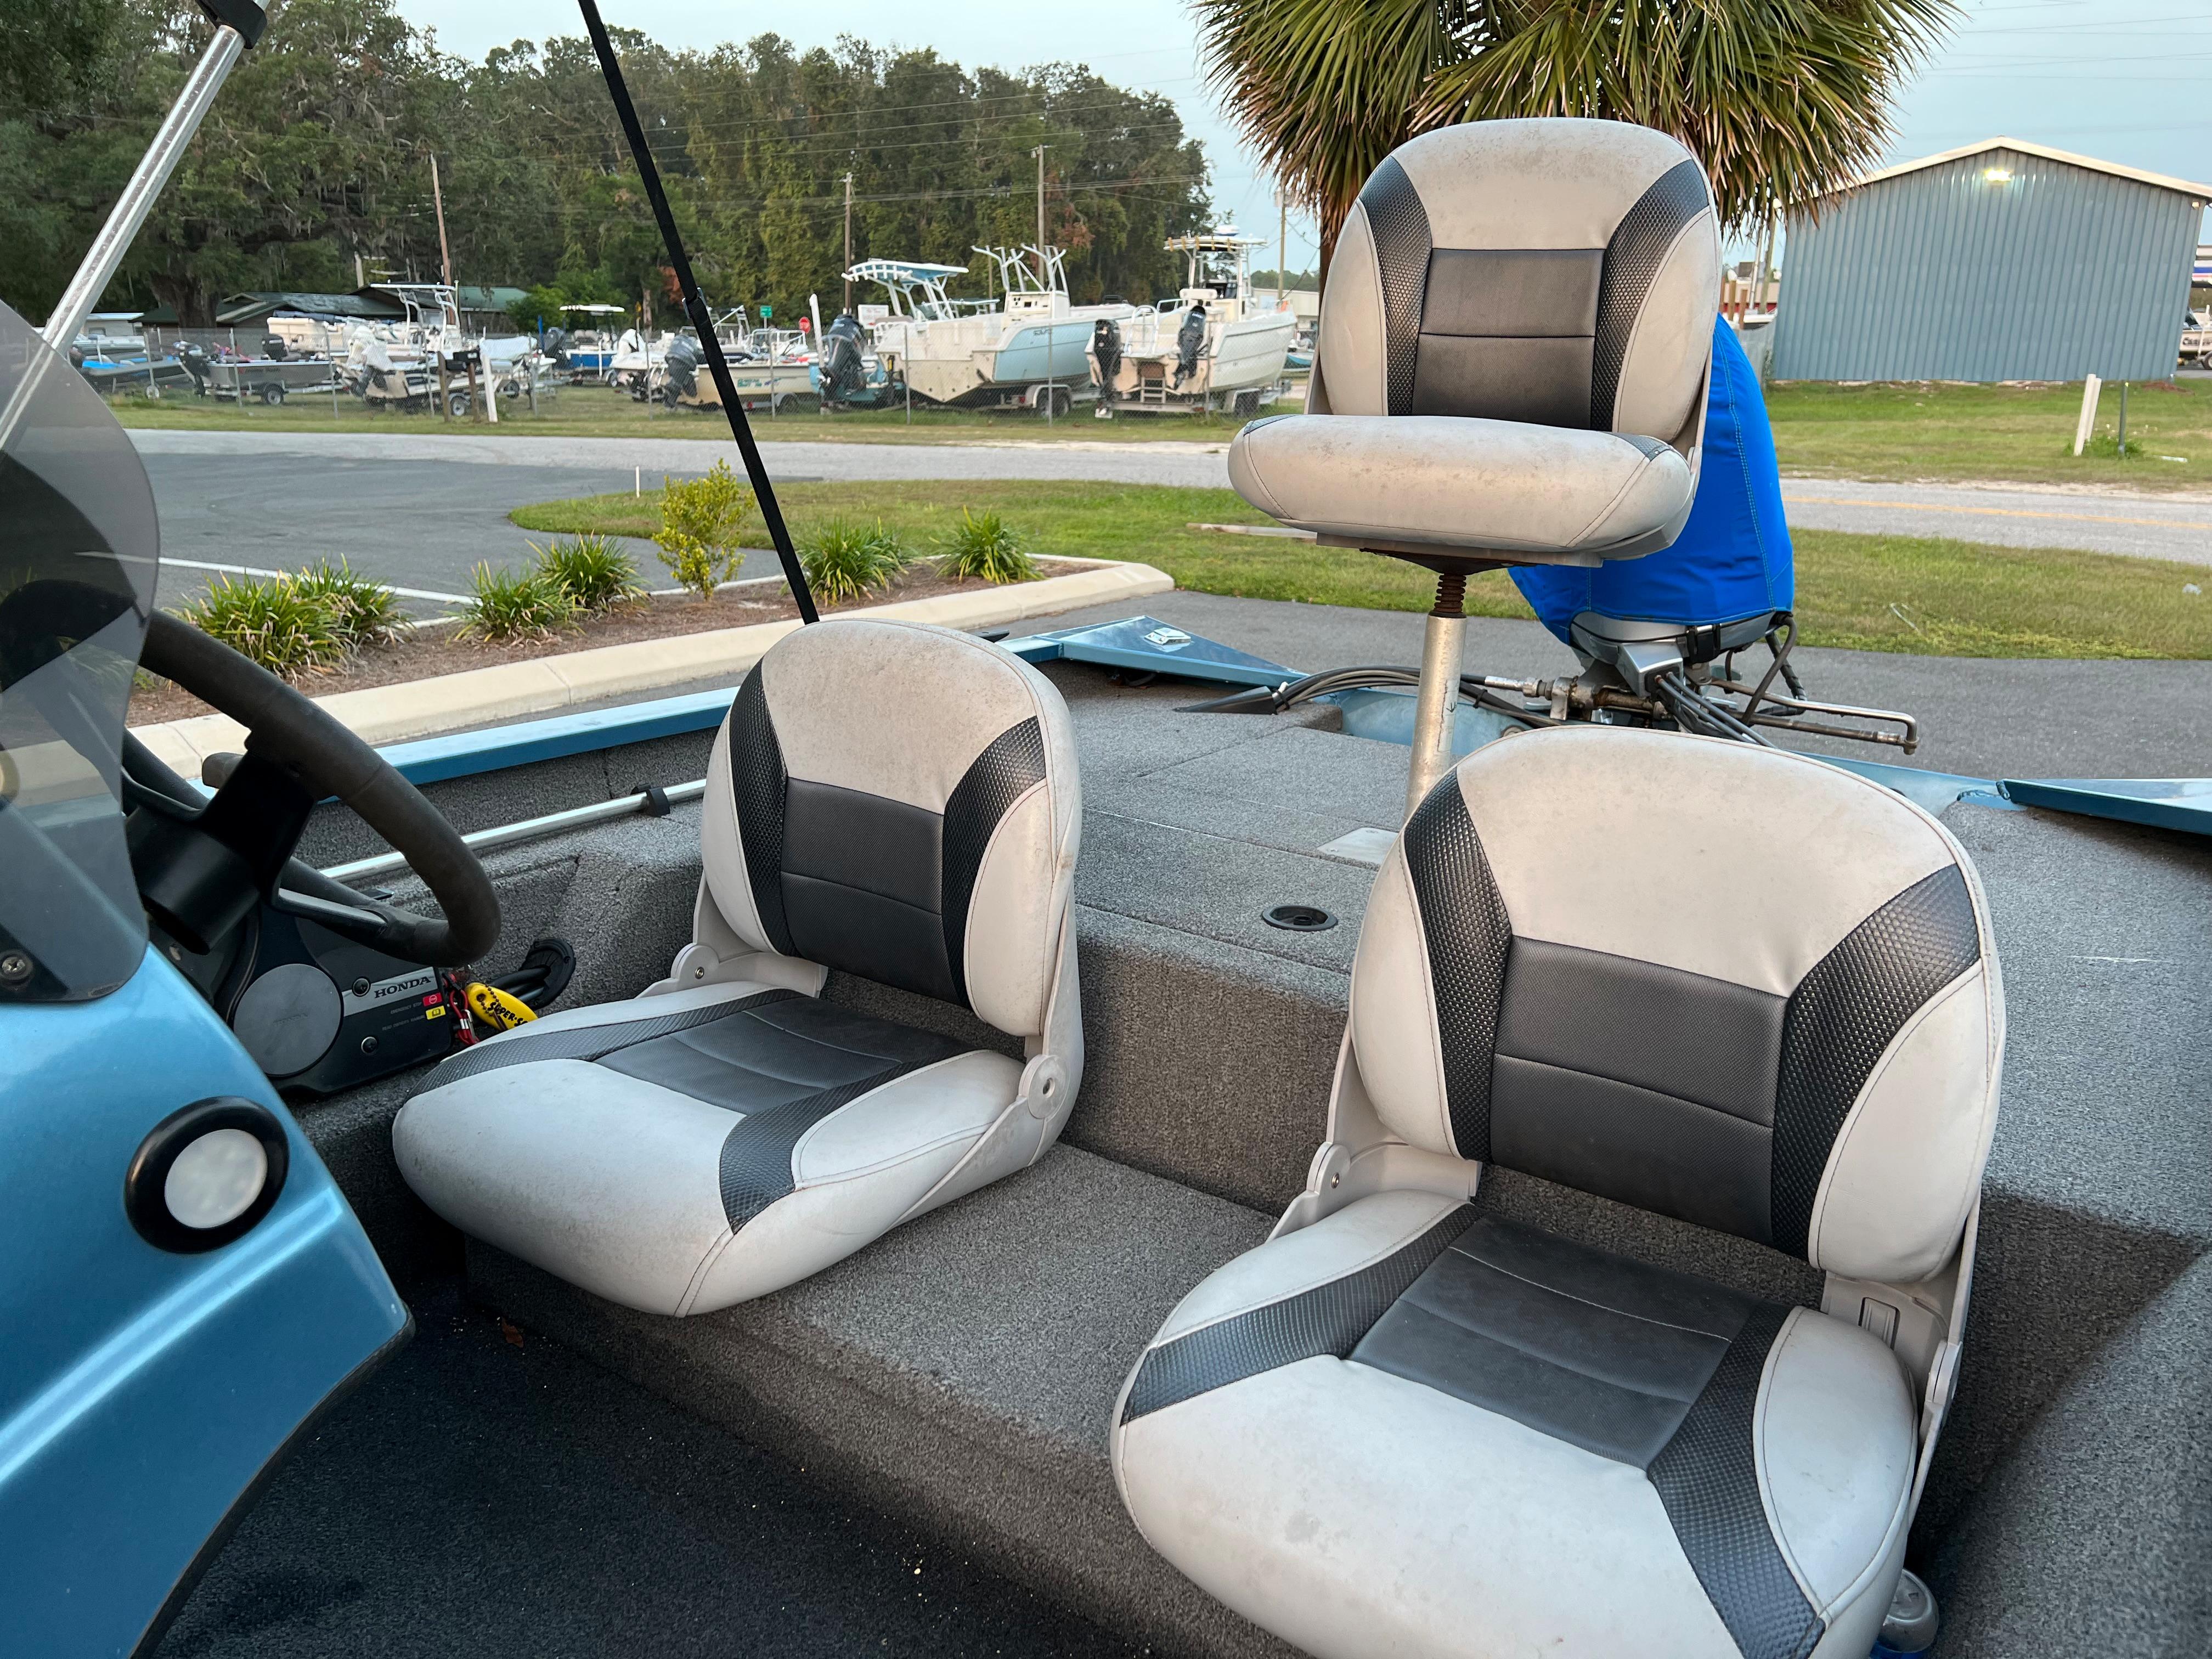 Used 2013 Alumacraft Pro 165, 32680 Old Town - Boat Trader